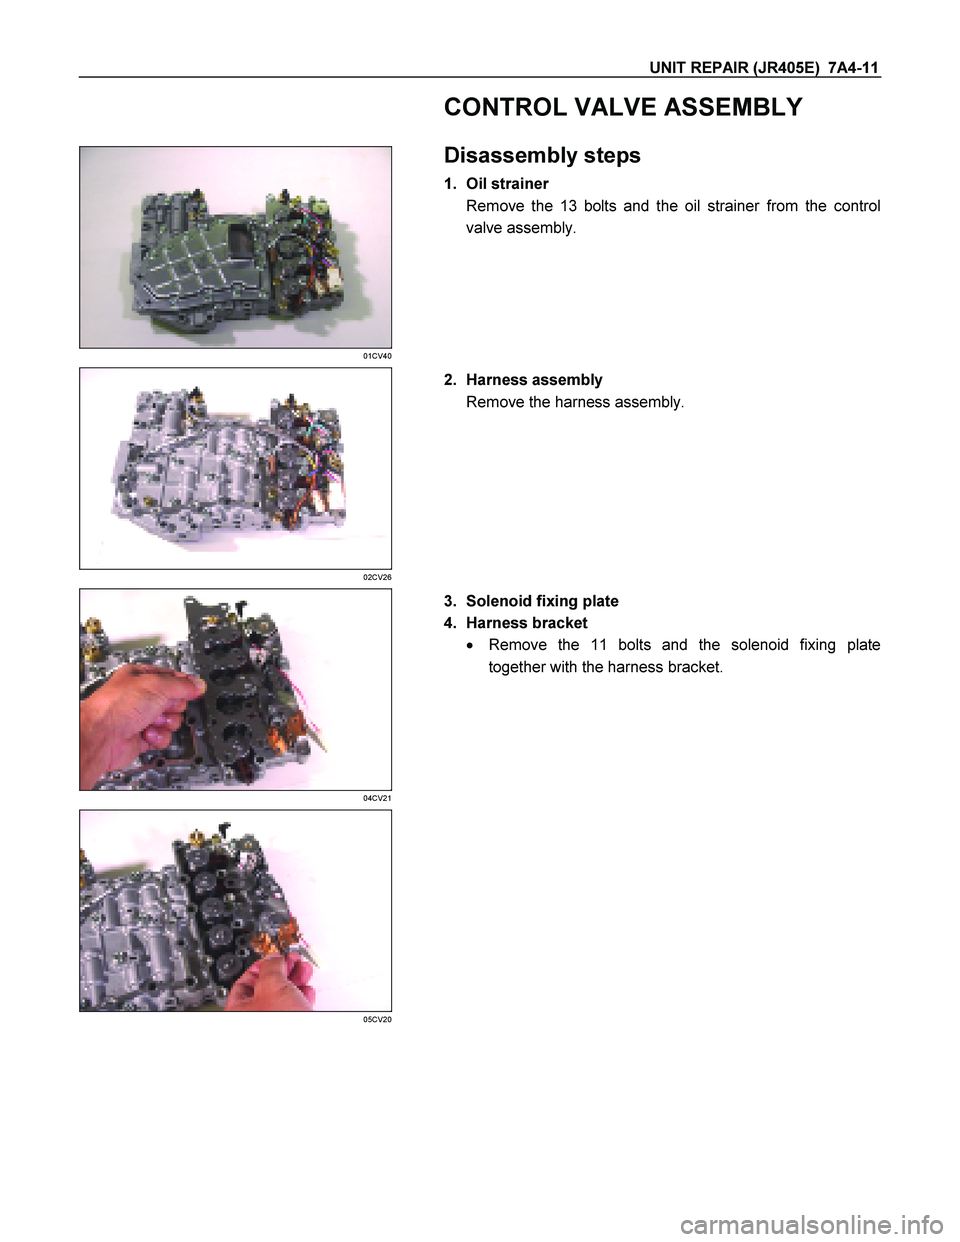 ISUZU TF SERIES 2004  Workshop Manual UNIT REPAIR (JR405E)  7A4-11 
   CONTROL VALVE ASSEMBLY 
 
 
01CV40 
  
 Disassembly steps 
1. Oil strainer  
Remove the 13 bolts and the oil strainer from the control
valve assembly.  
 
 
02CV26 
  